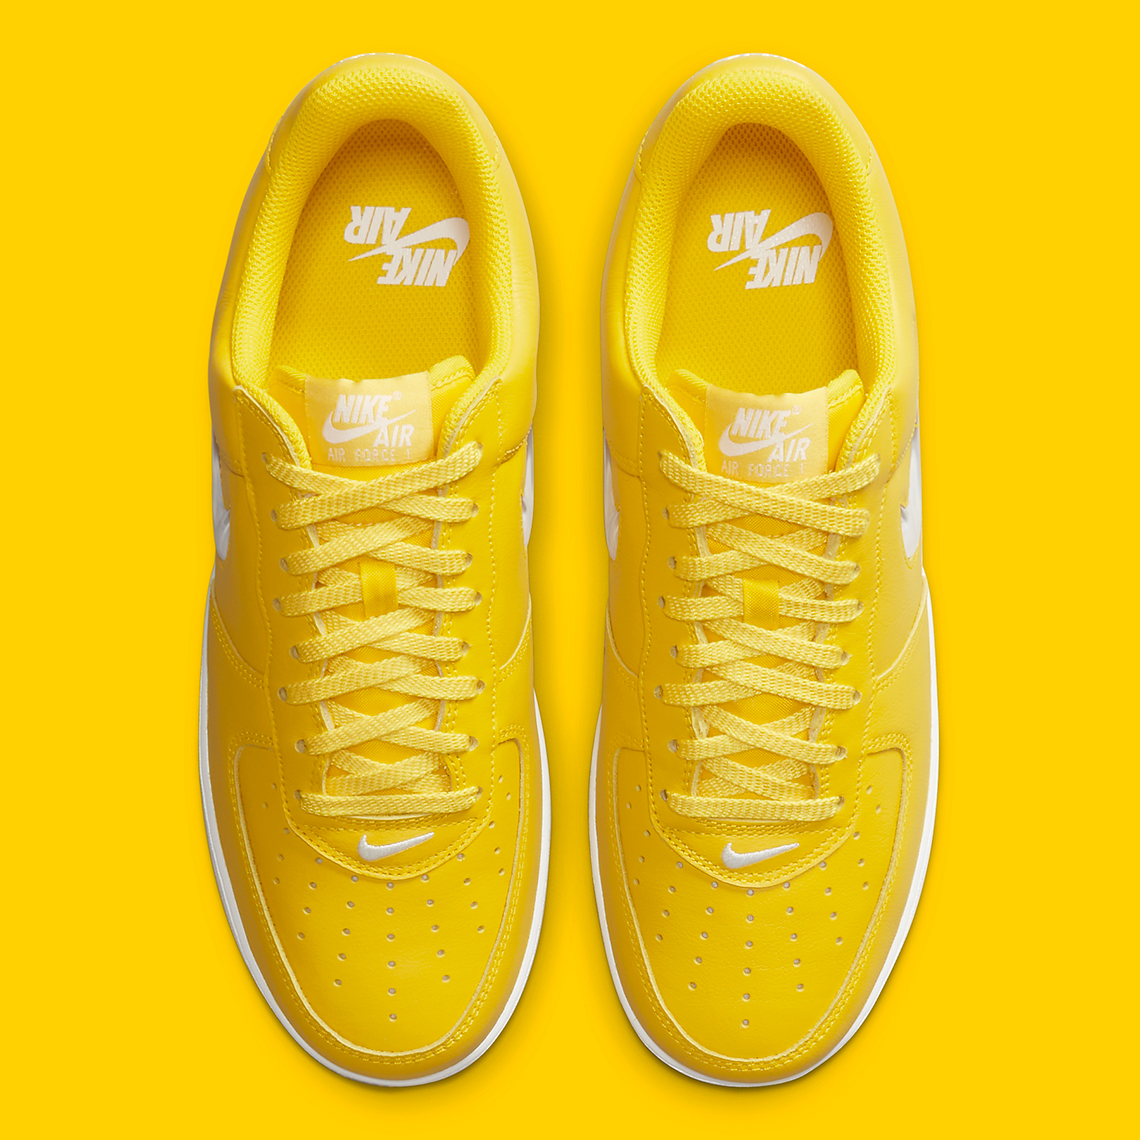 nike air force 1 low color of the month yellow fj1044 700 1